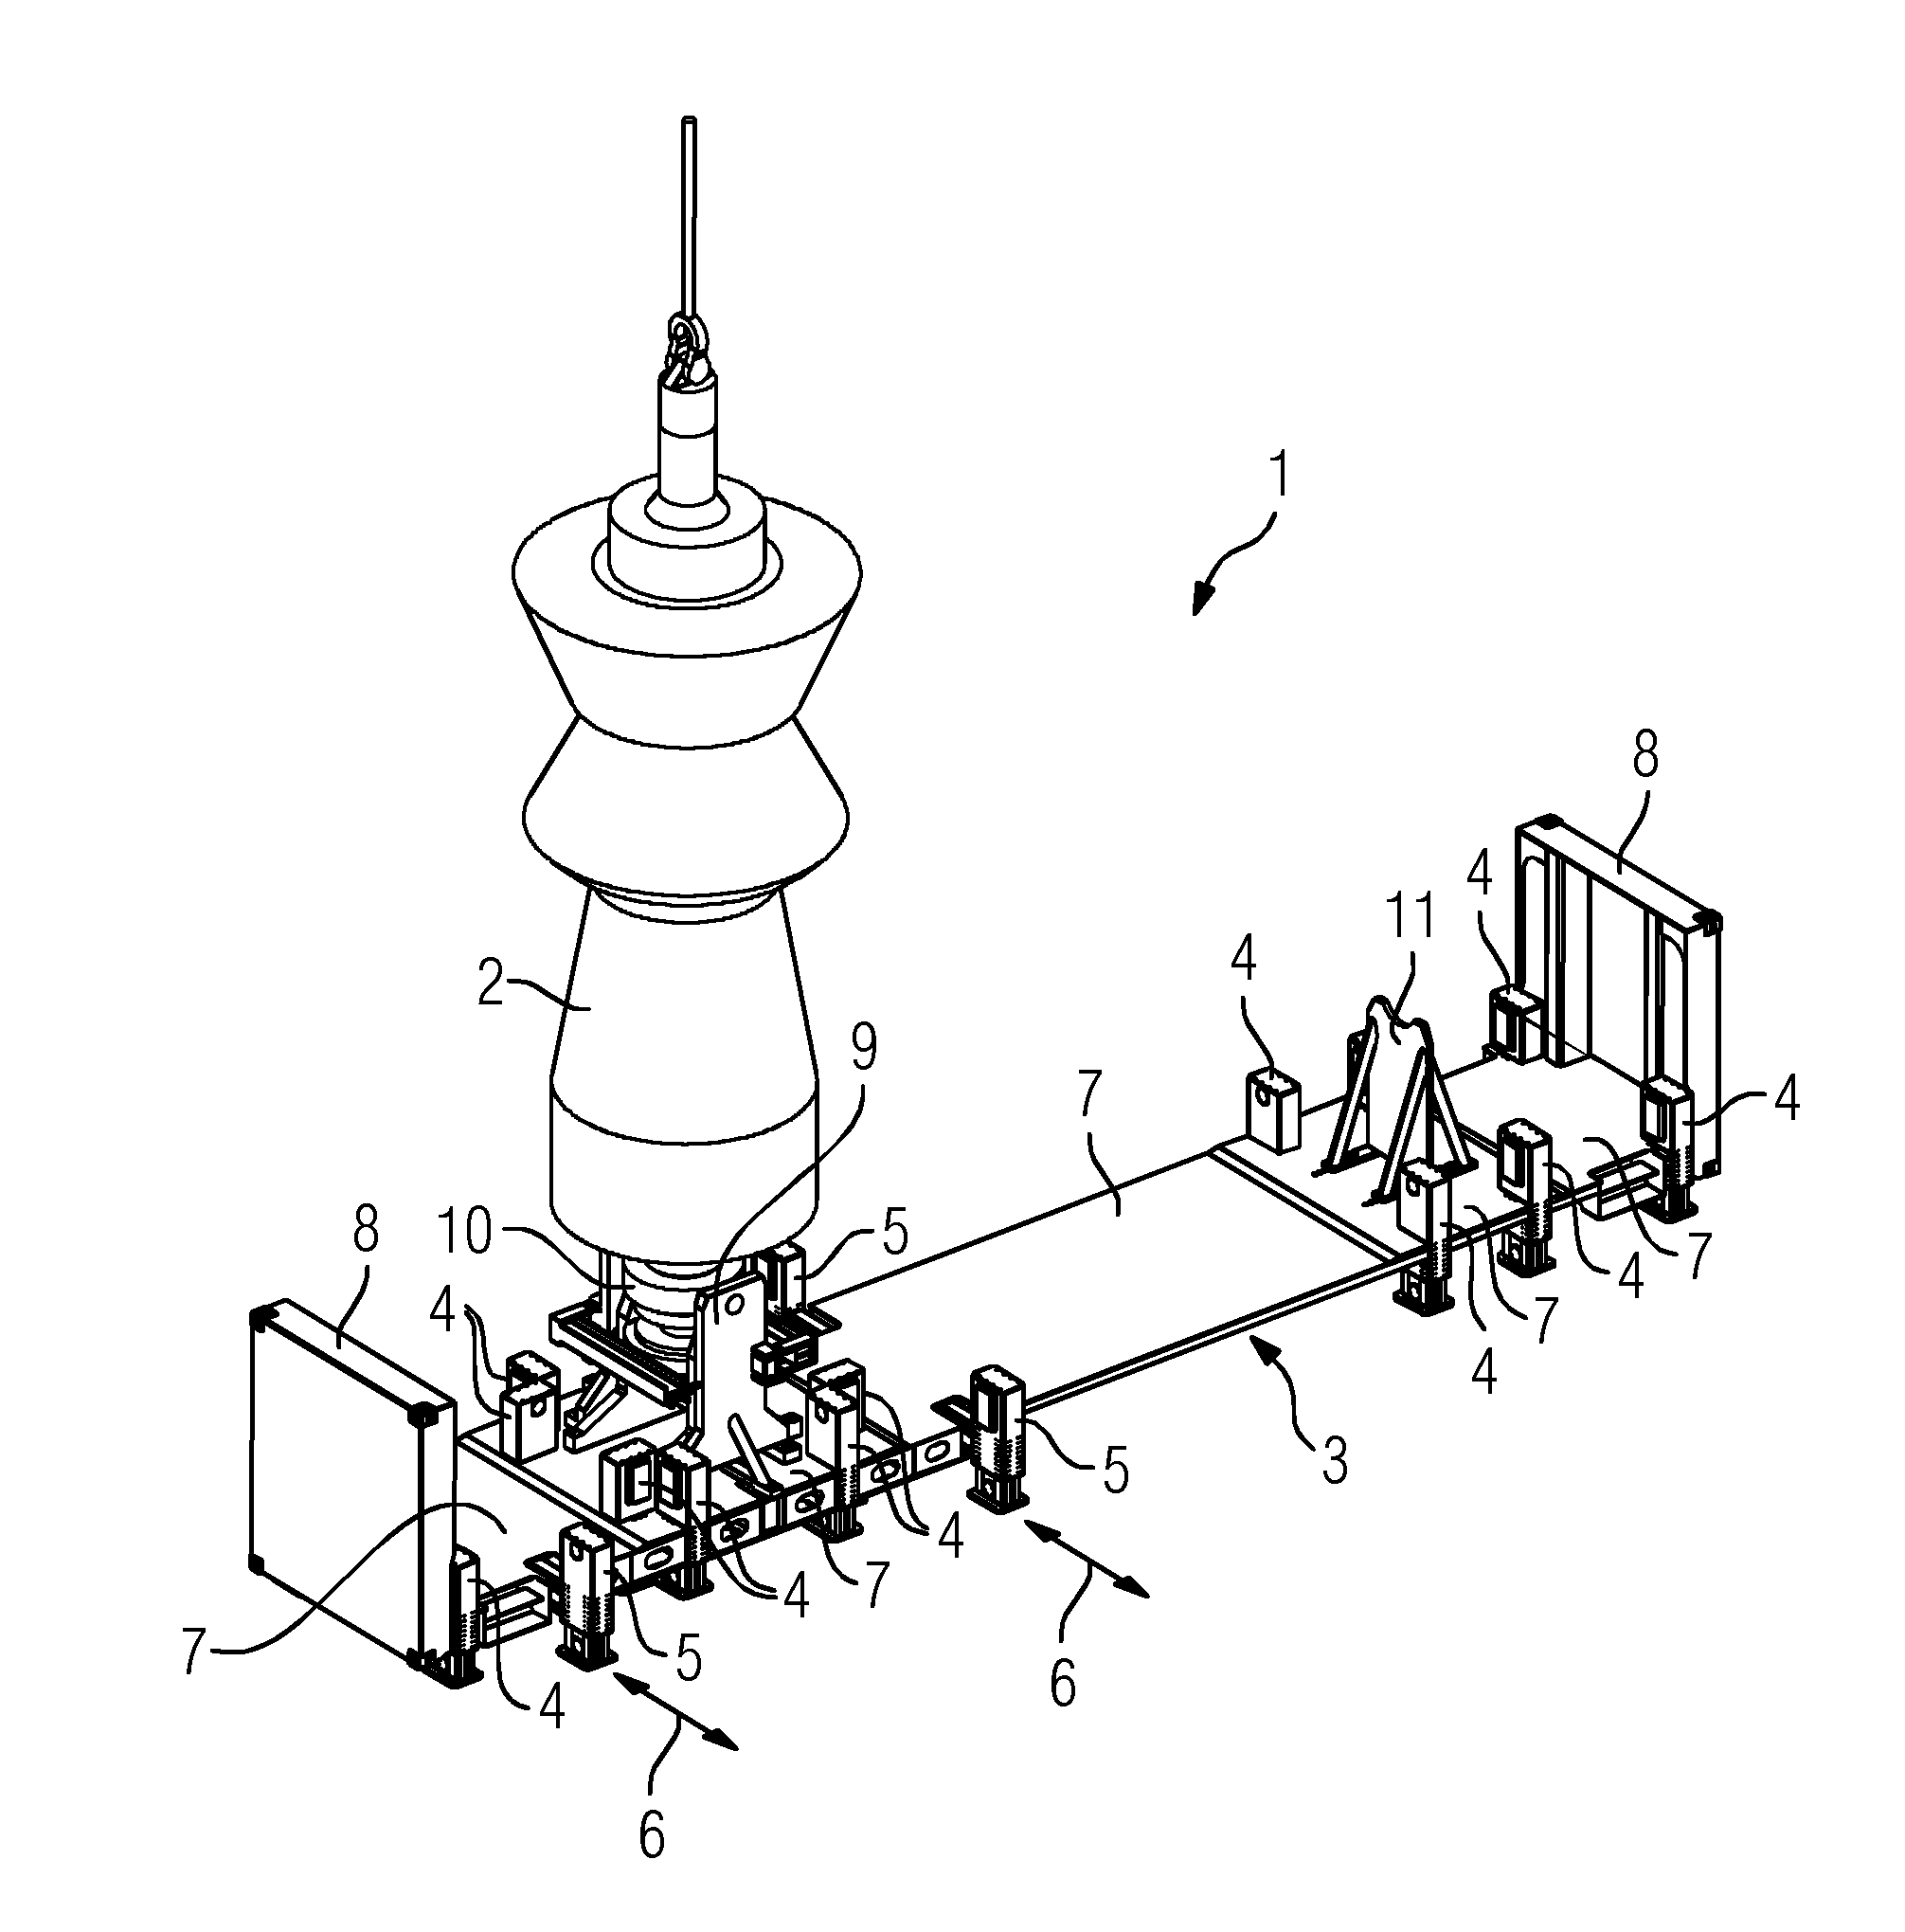 Rotor pivoting system